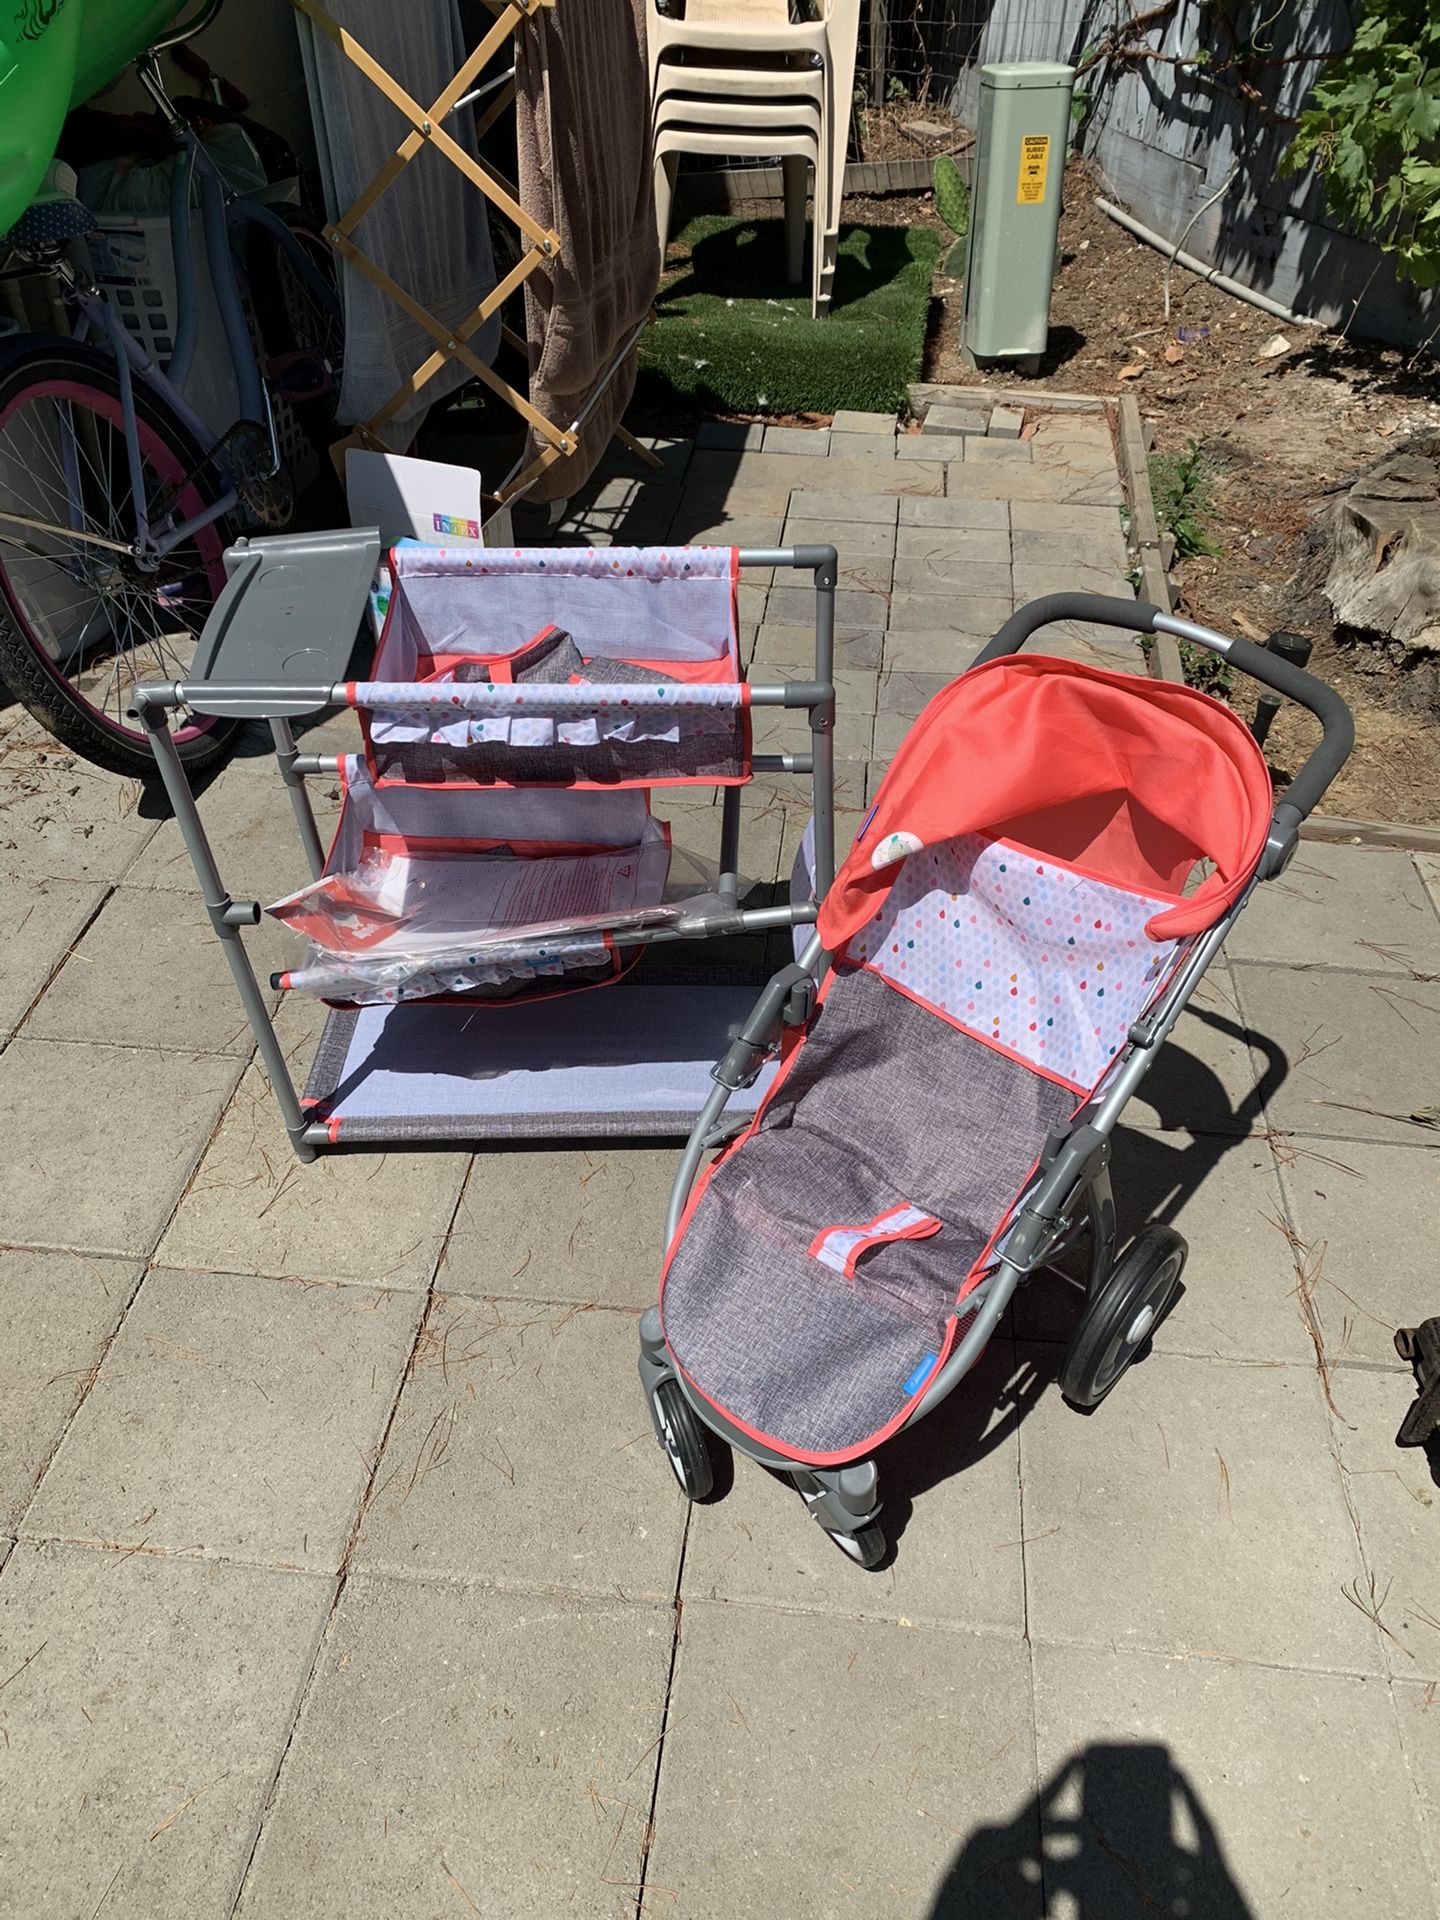 Stroller and crib kids toys